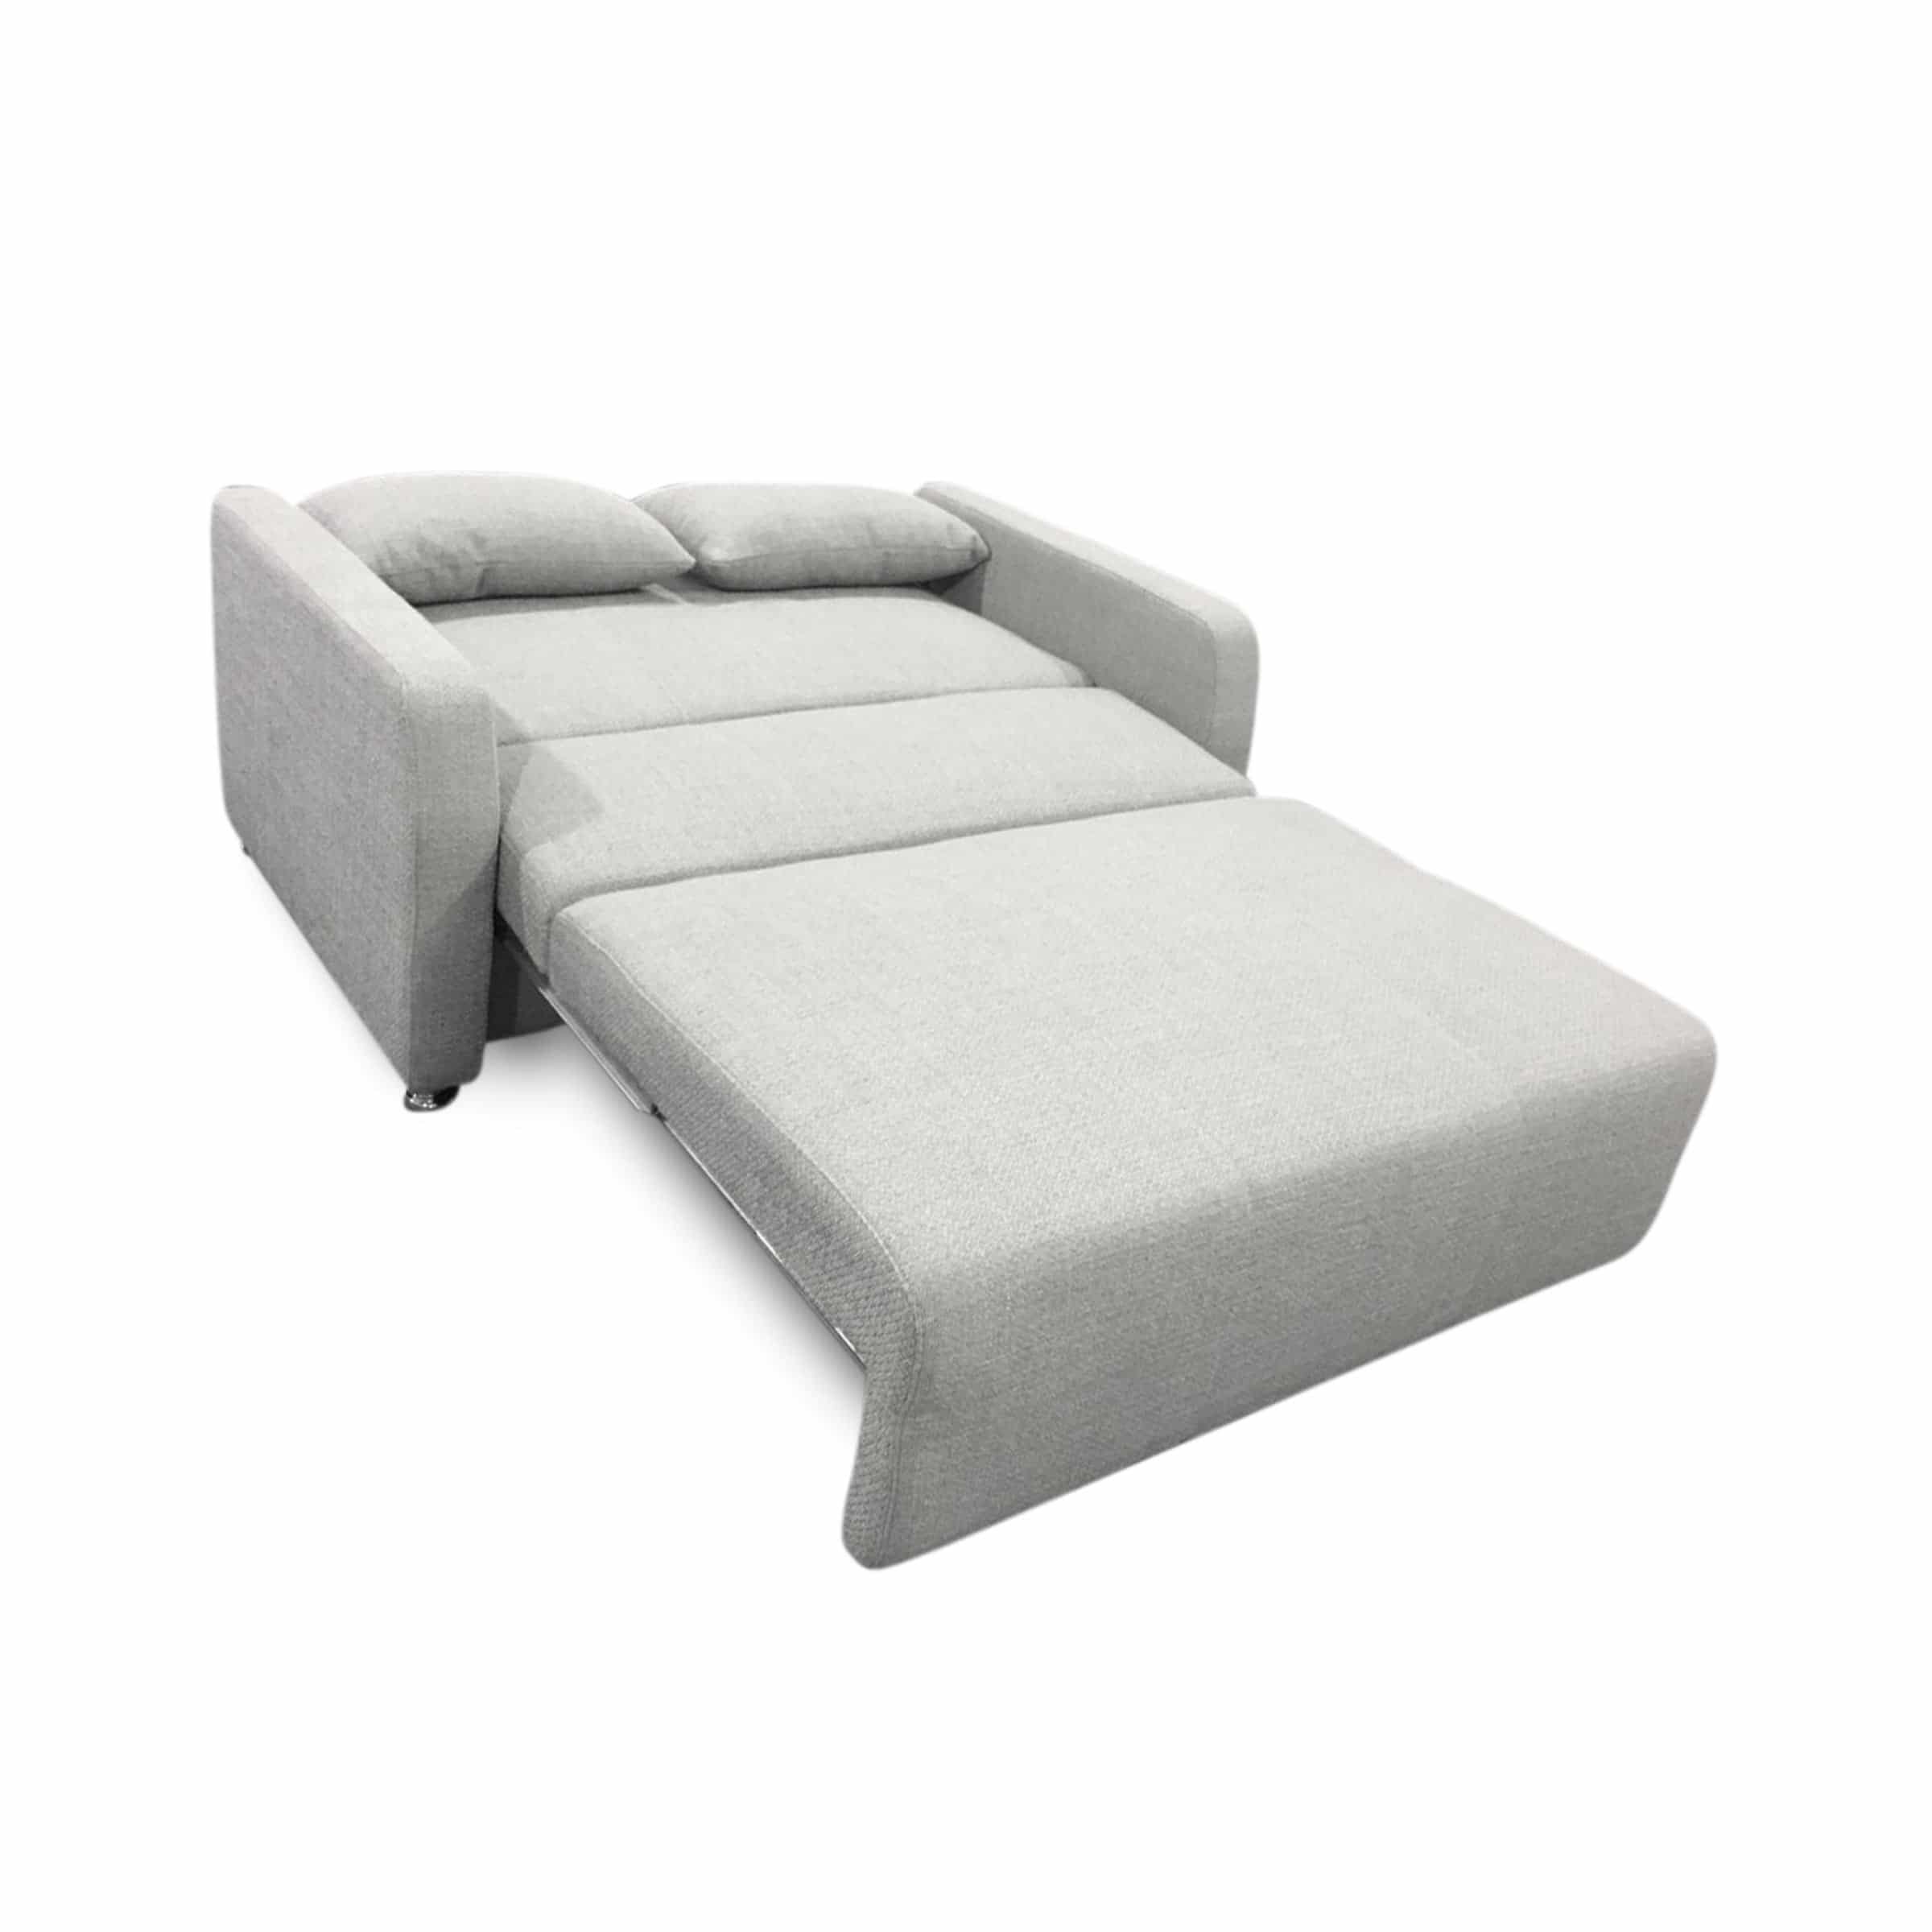 Mysterieus Frank Worthley tank The Talia - Double Sofa Bed with Storage - Expand Furniture - Folding  Tables, Smarter Wall Beds, Space Savers